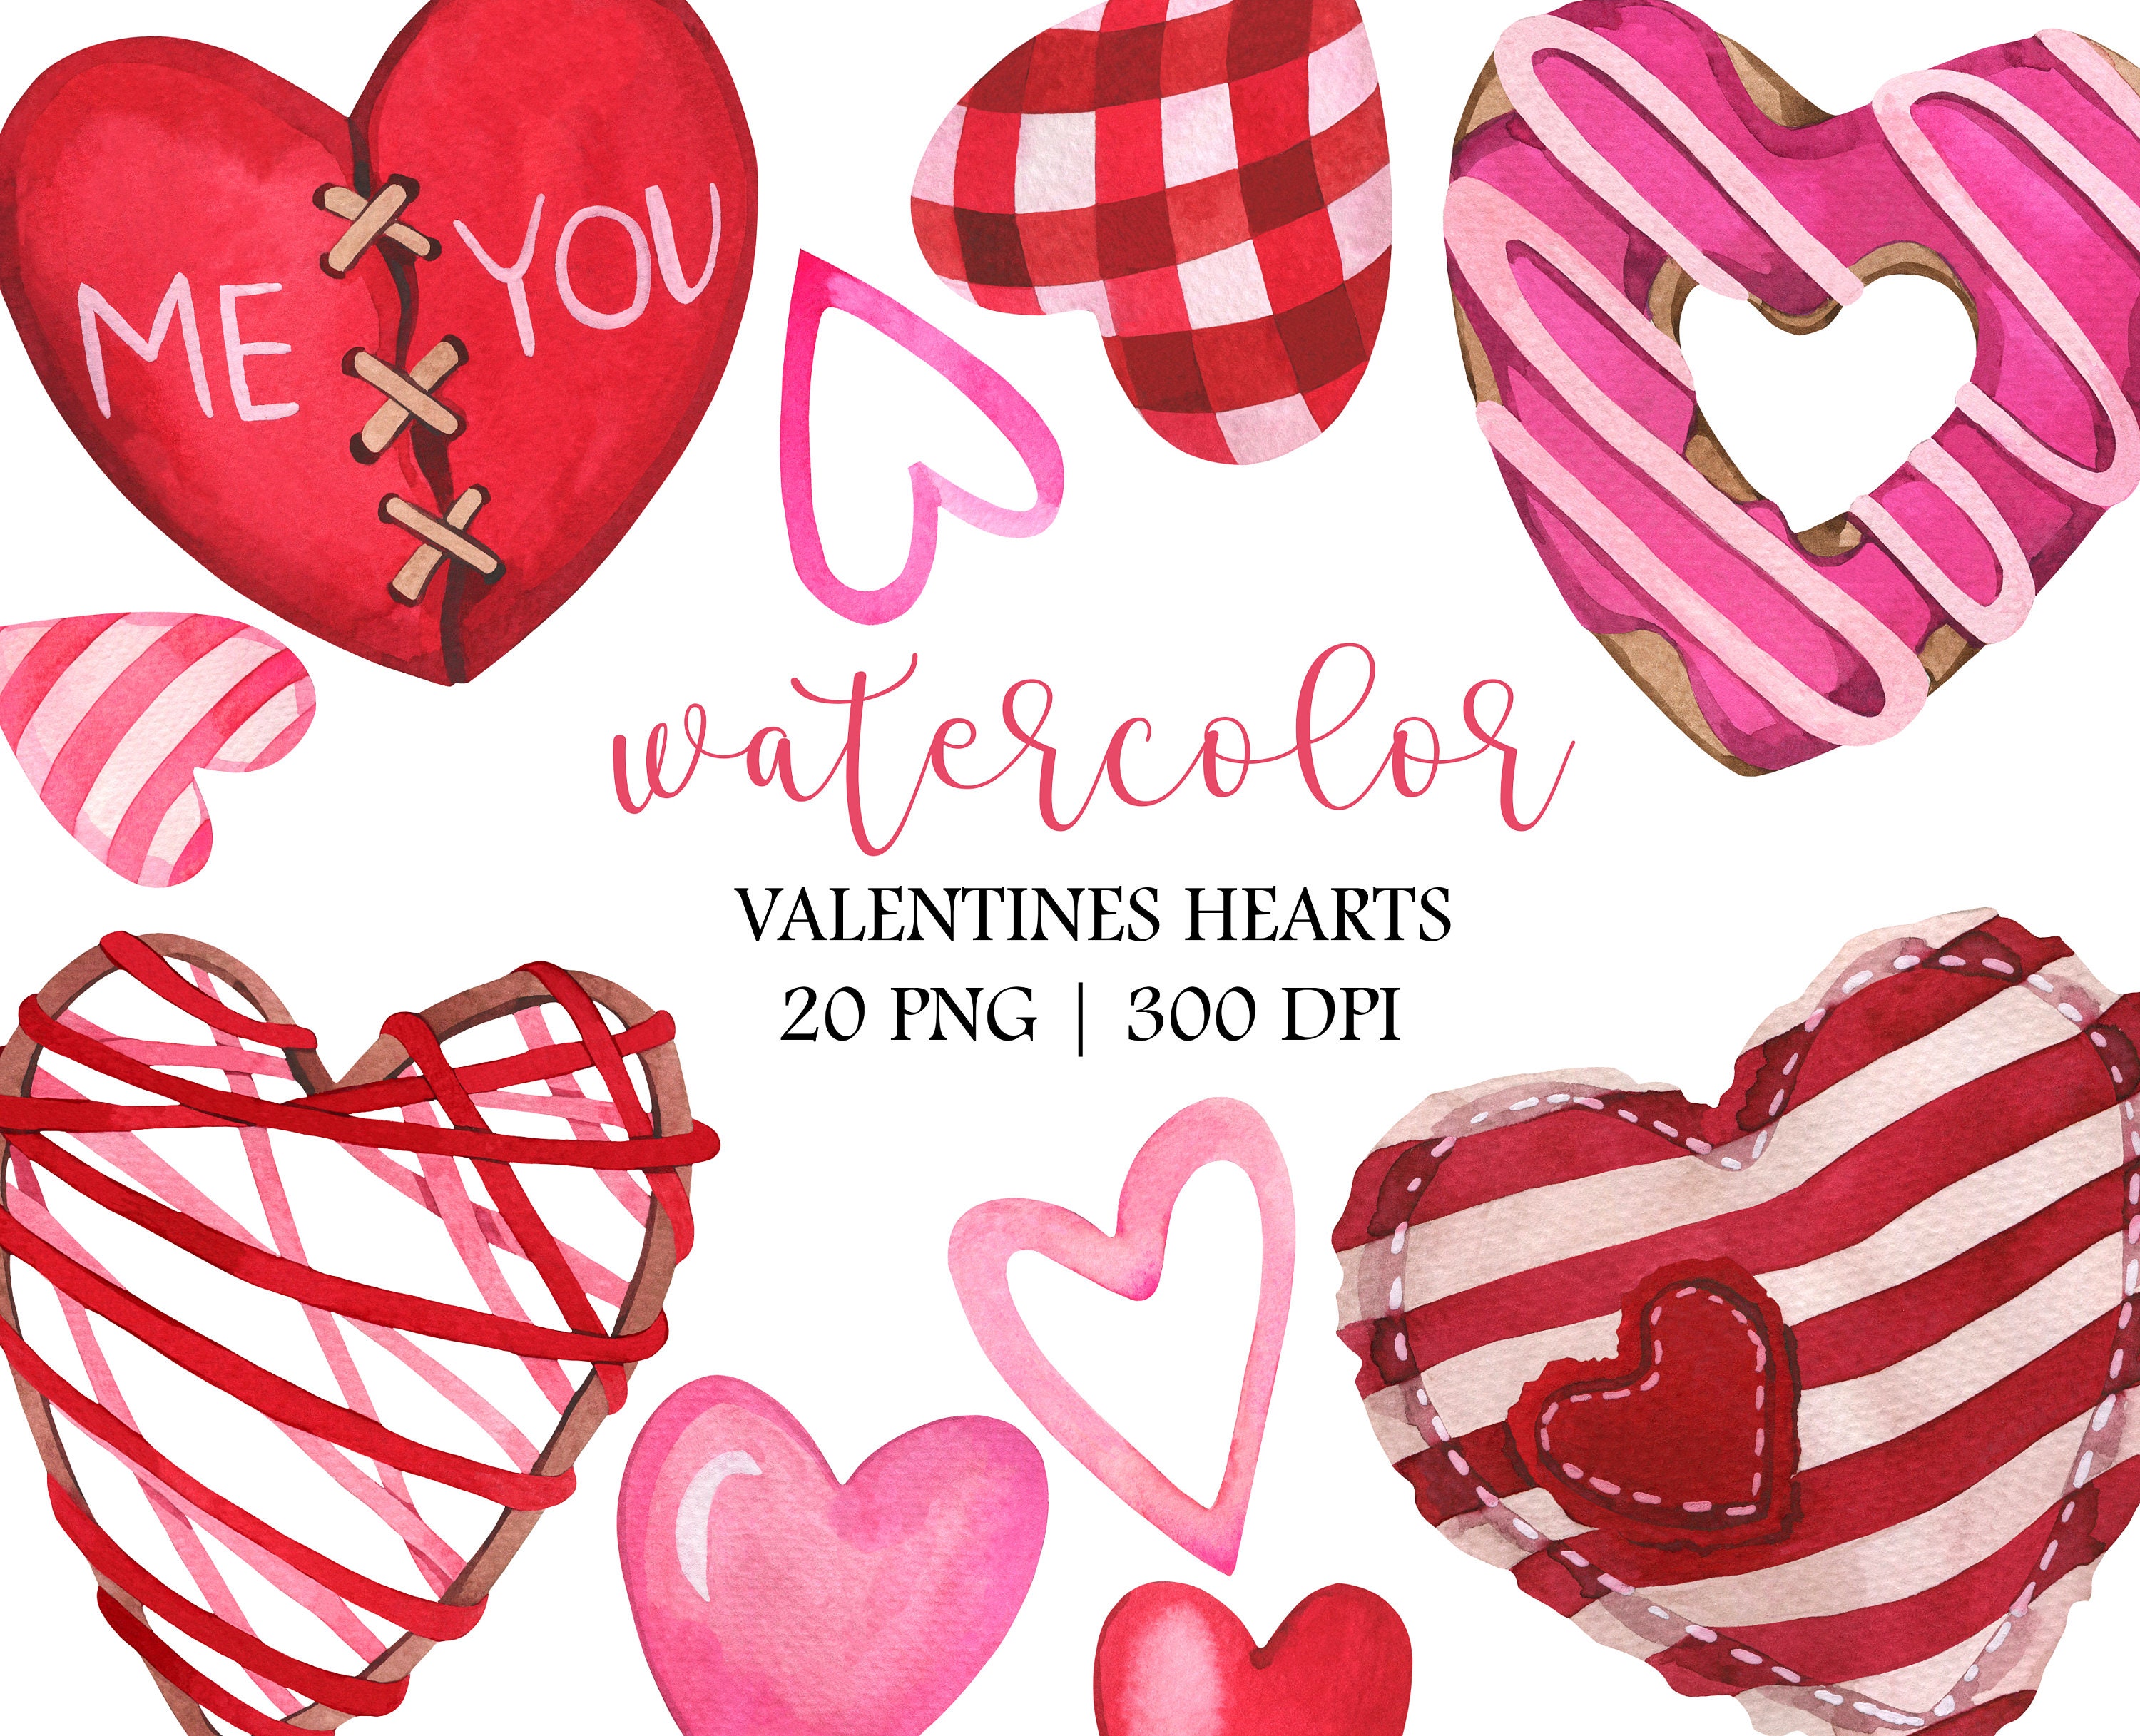 Watercolor Valentines Clipart, Watercolor Gift Box Clipart, PNG